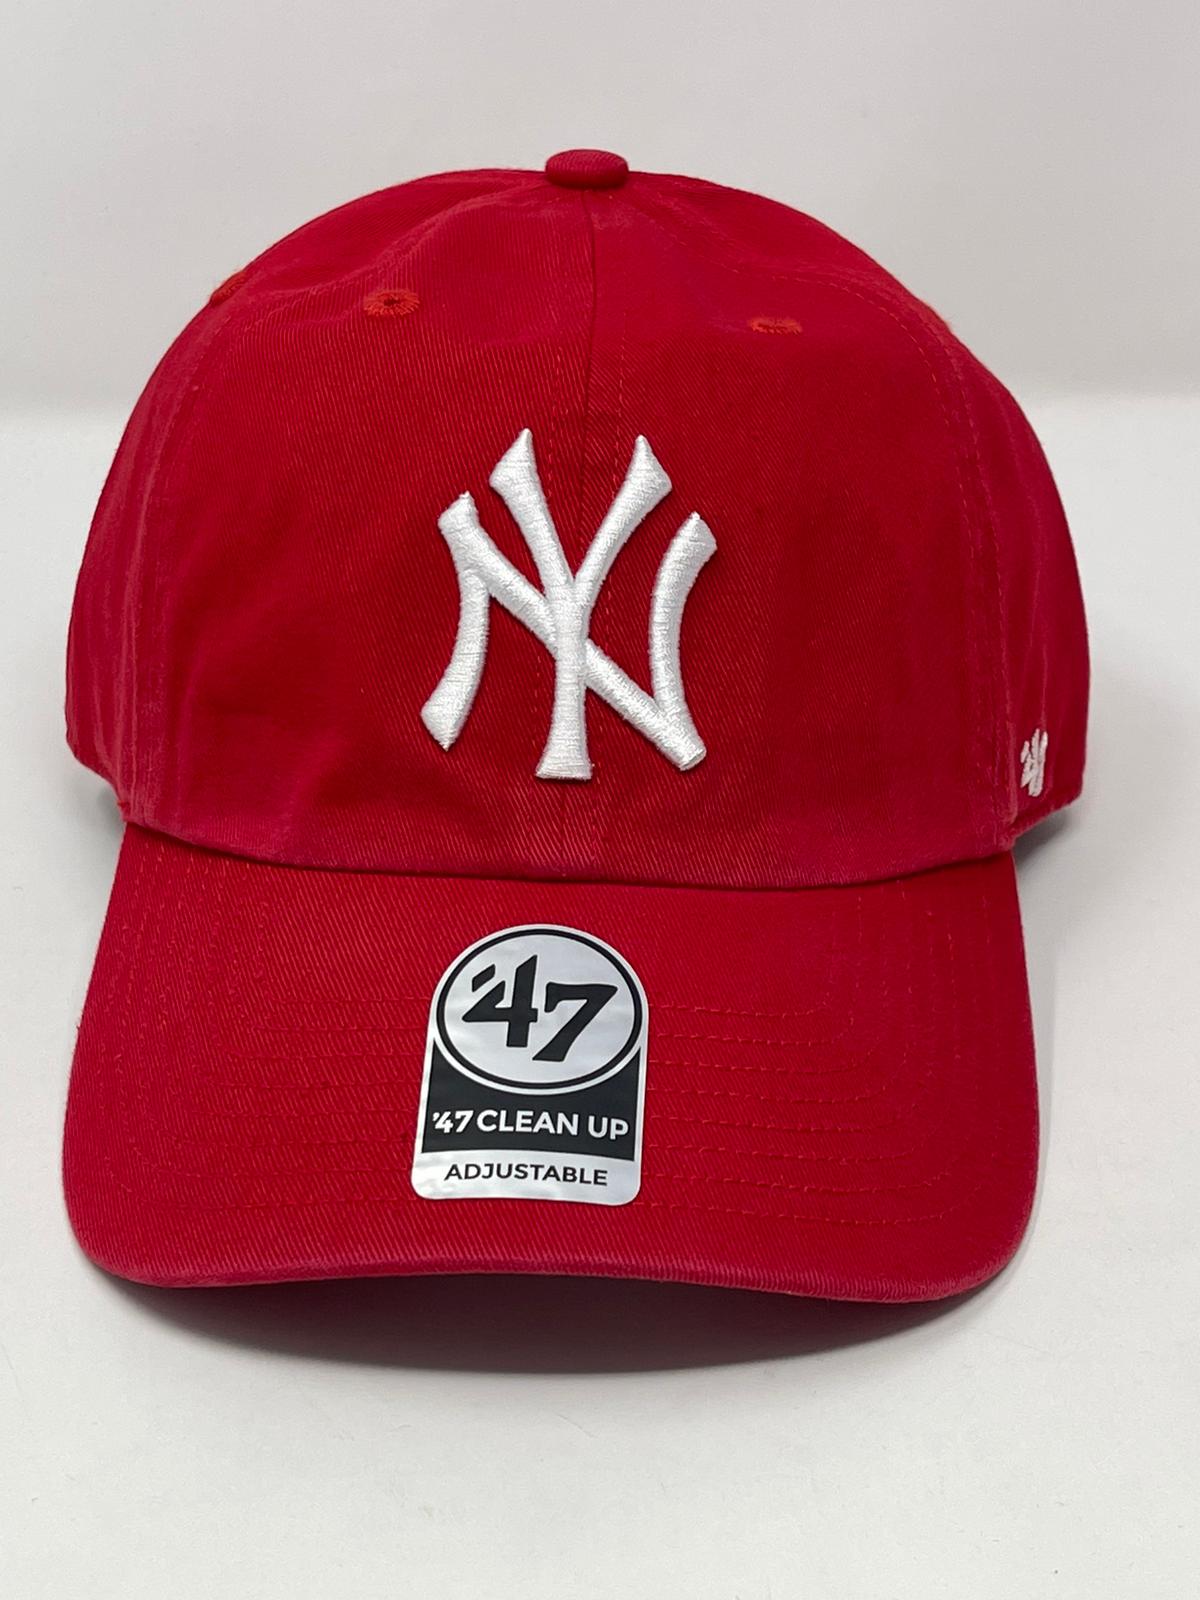 Shop '47 Brand Clean Up Ny Giants Retro Hat F-RGW21GWS-RD red